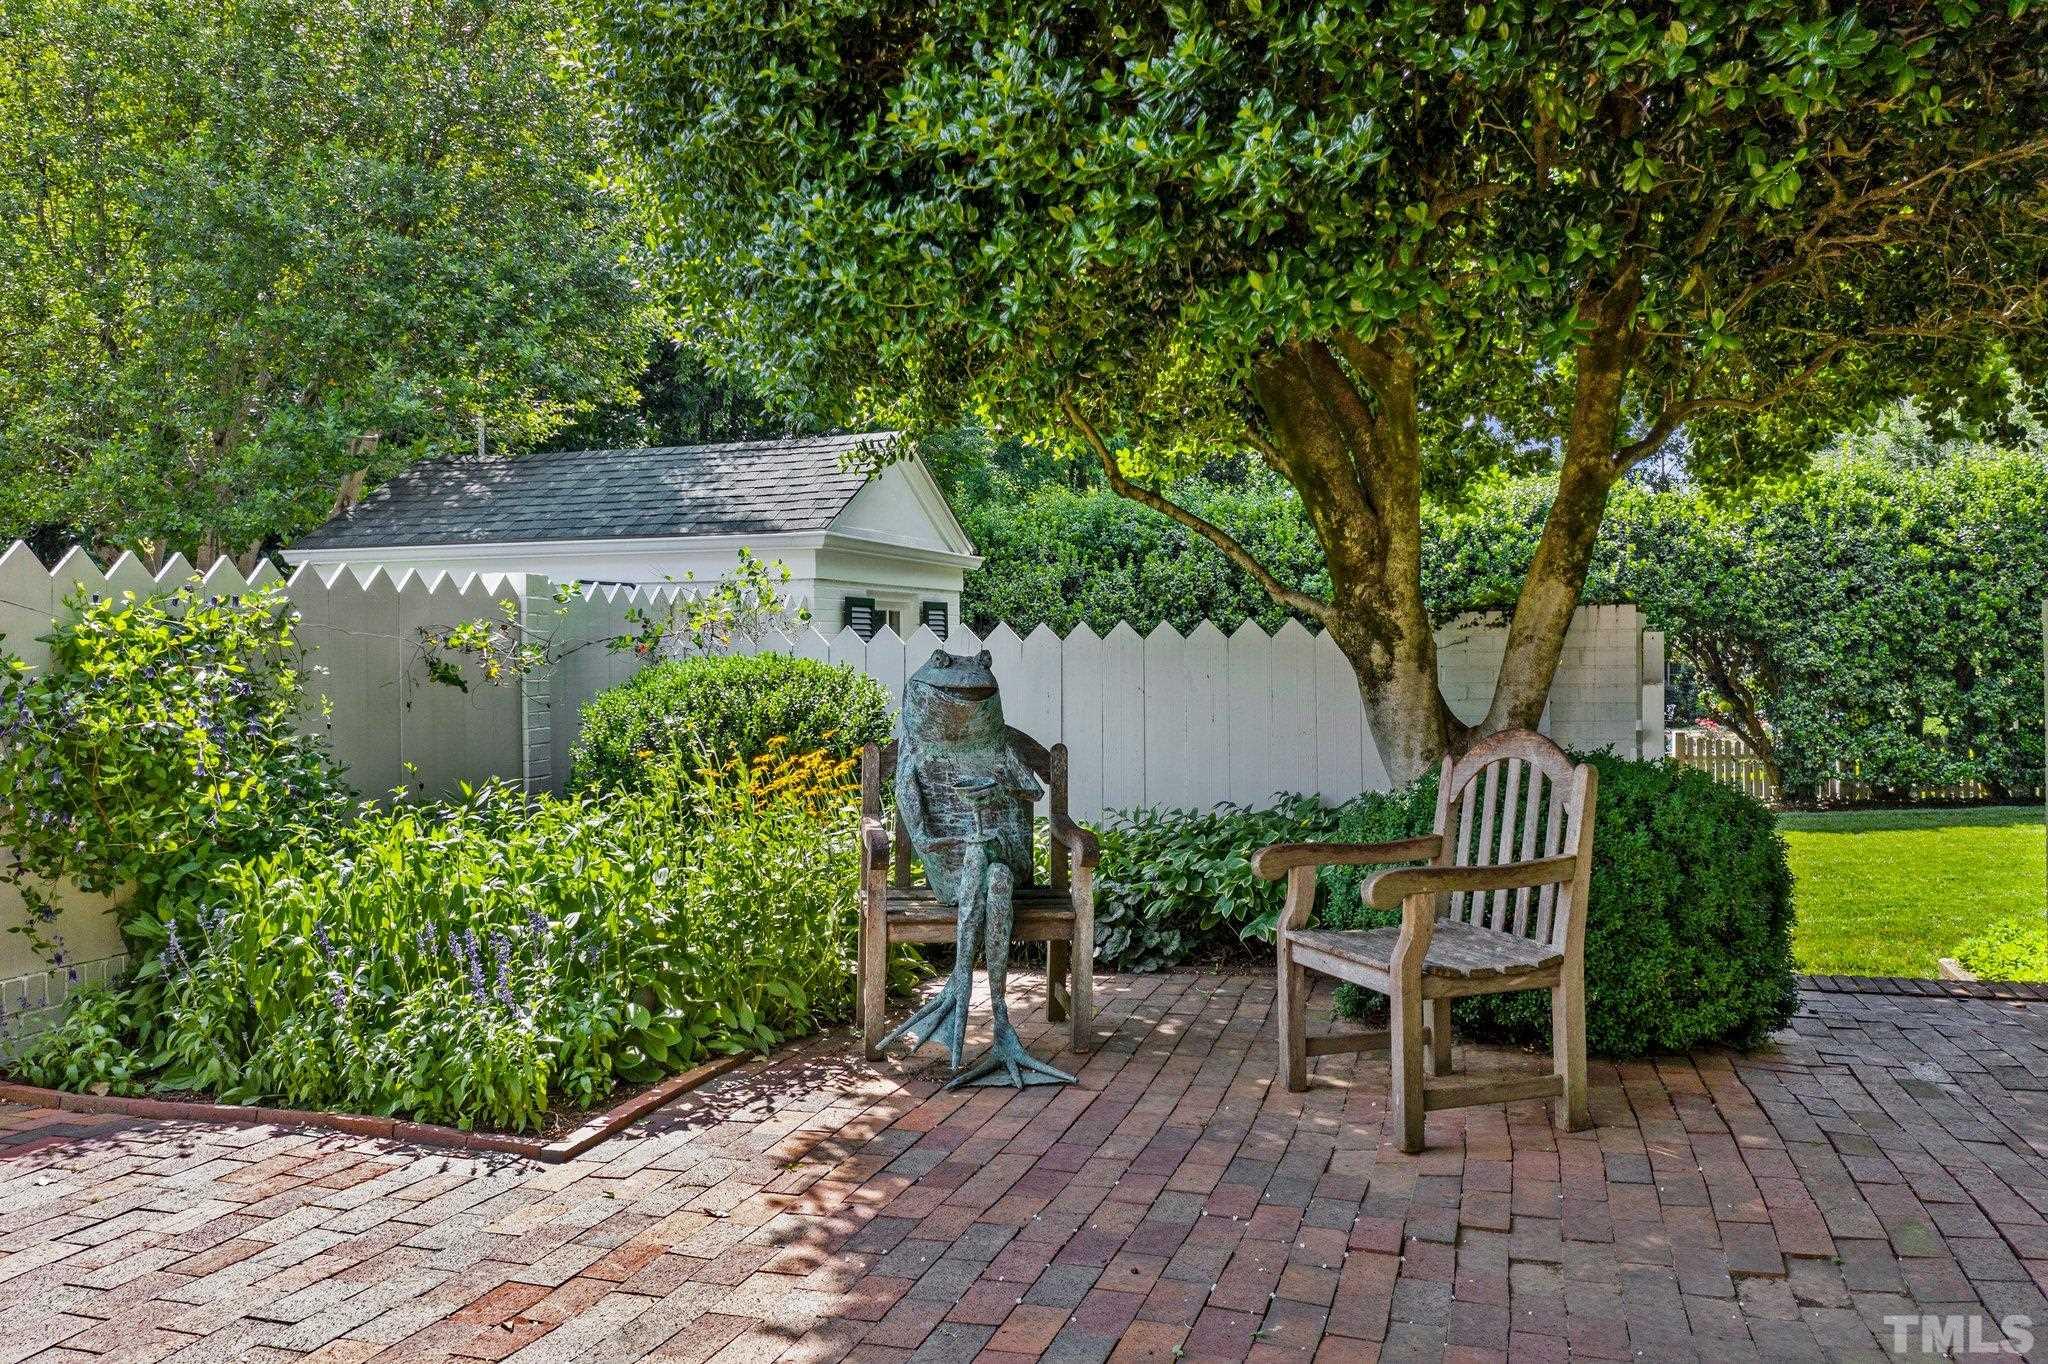 Unique patio with brick walls, multiple sitting areas and gardens-a peaceful oasis from the rest of Raleigh. The yard adds tranquility, reflection and ambiance to the landscape.